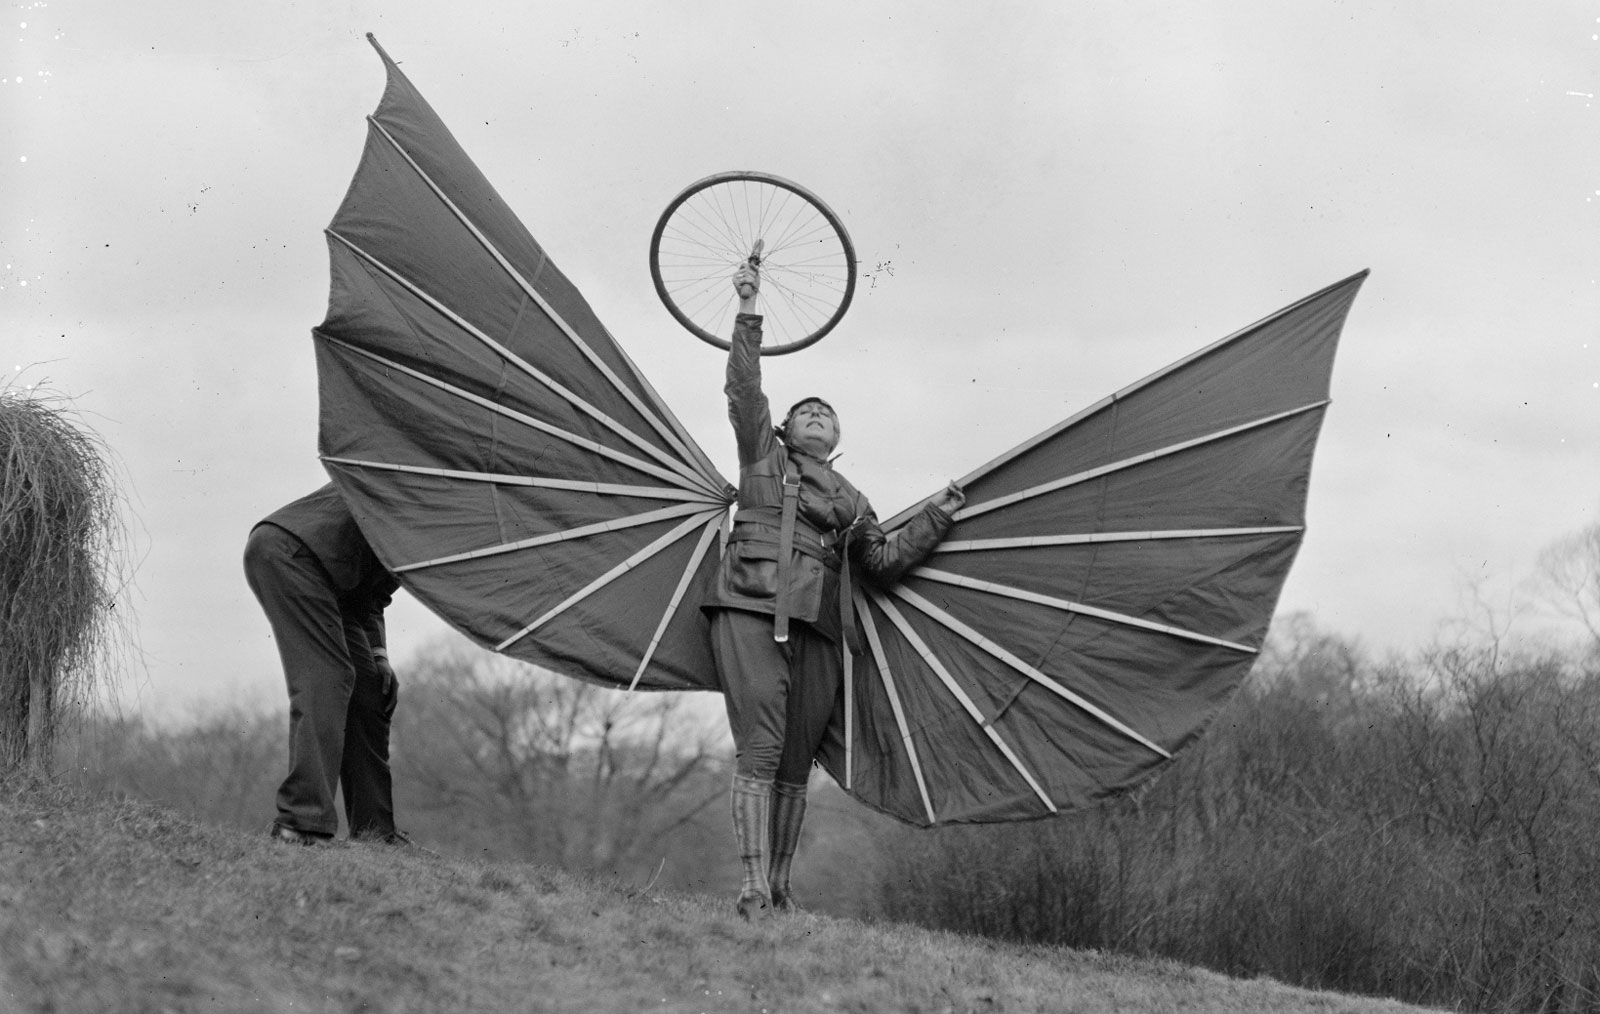 Mme. Helene Alberti with her flying prosthesis to demonstrate the Greek law of cosmic motion.